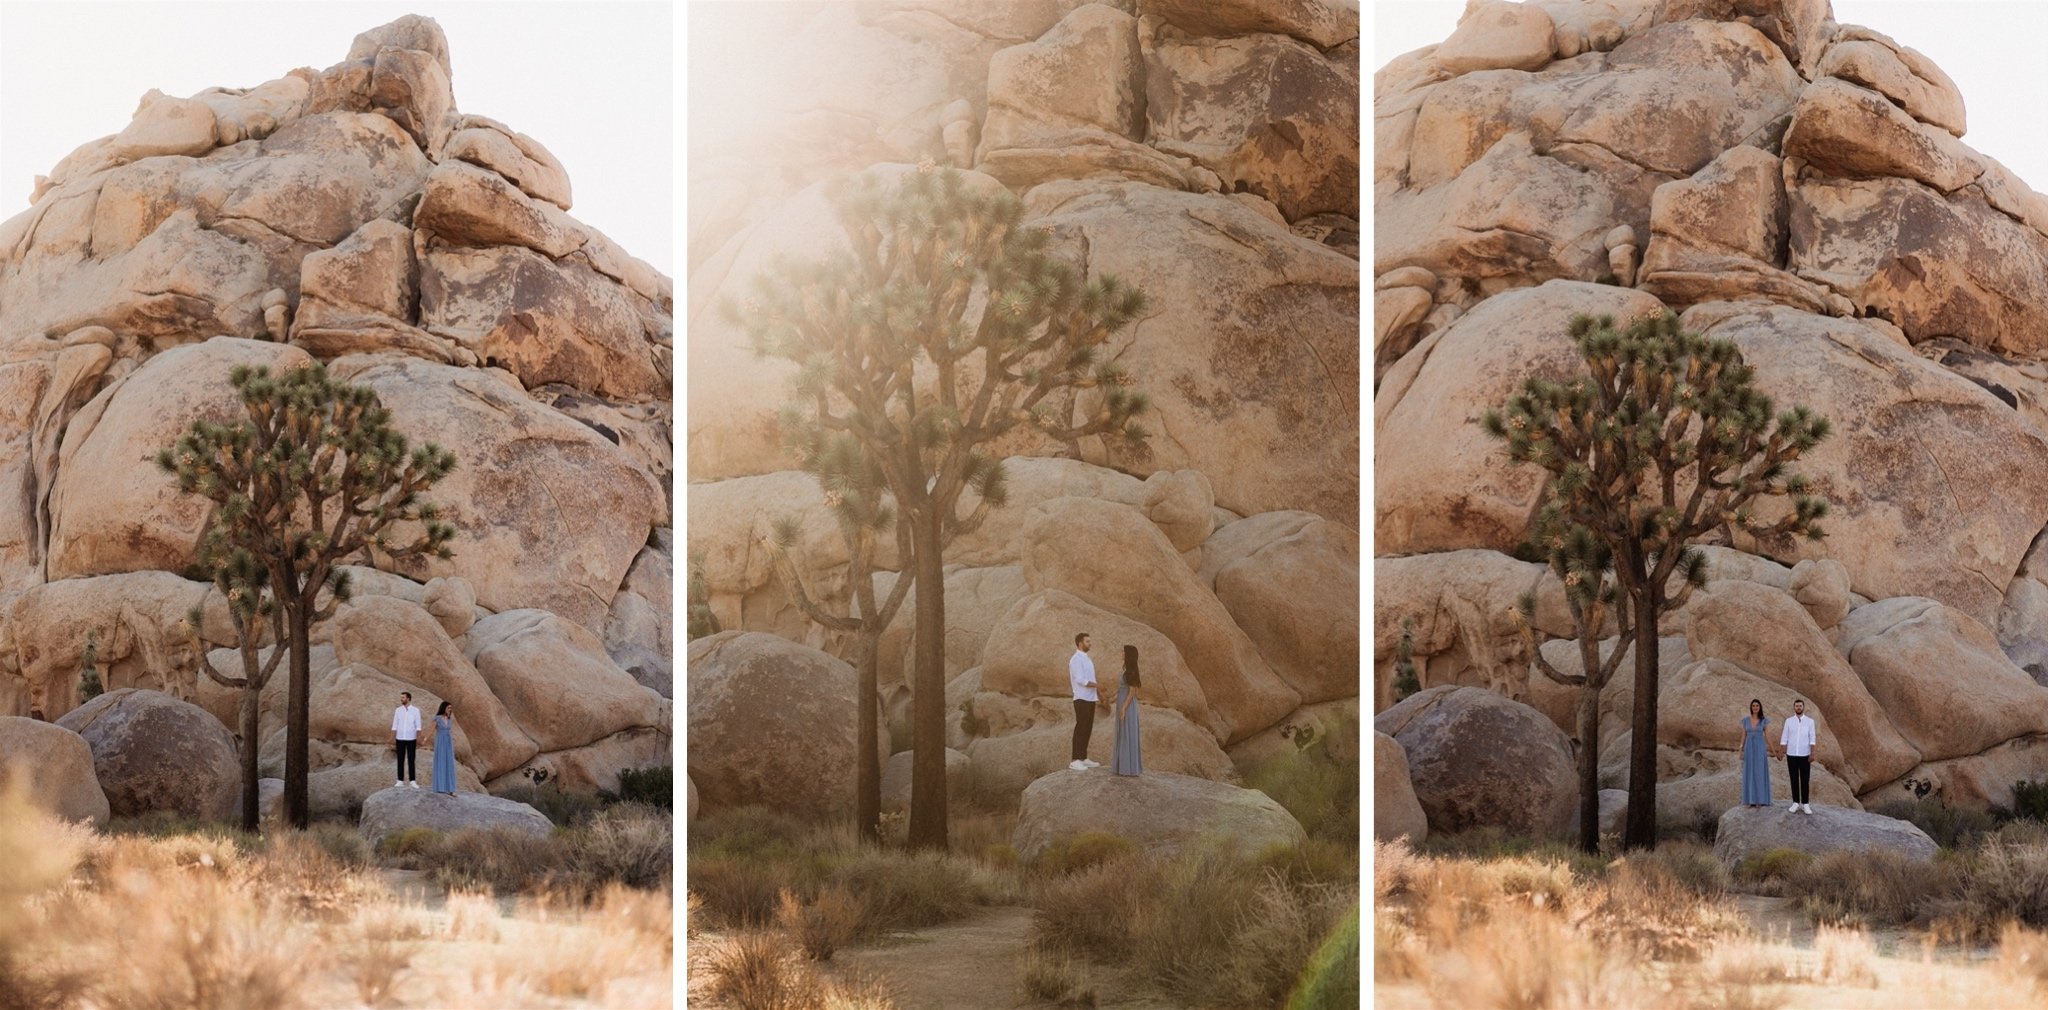 Joshua Tree Couples Session Surprise Proposal - Will Khoury Photography_19.jpg